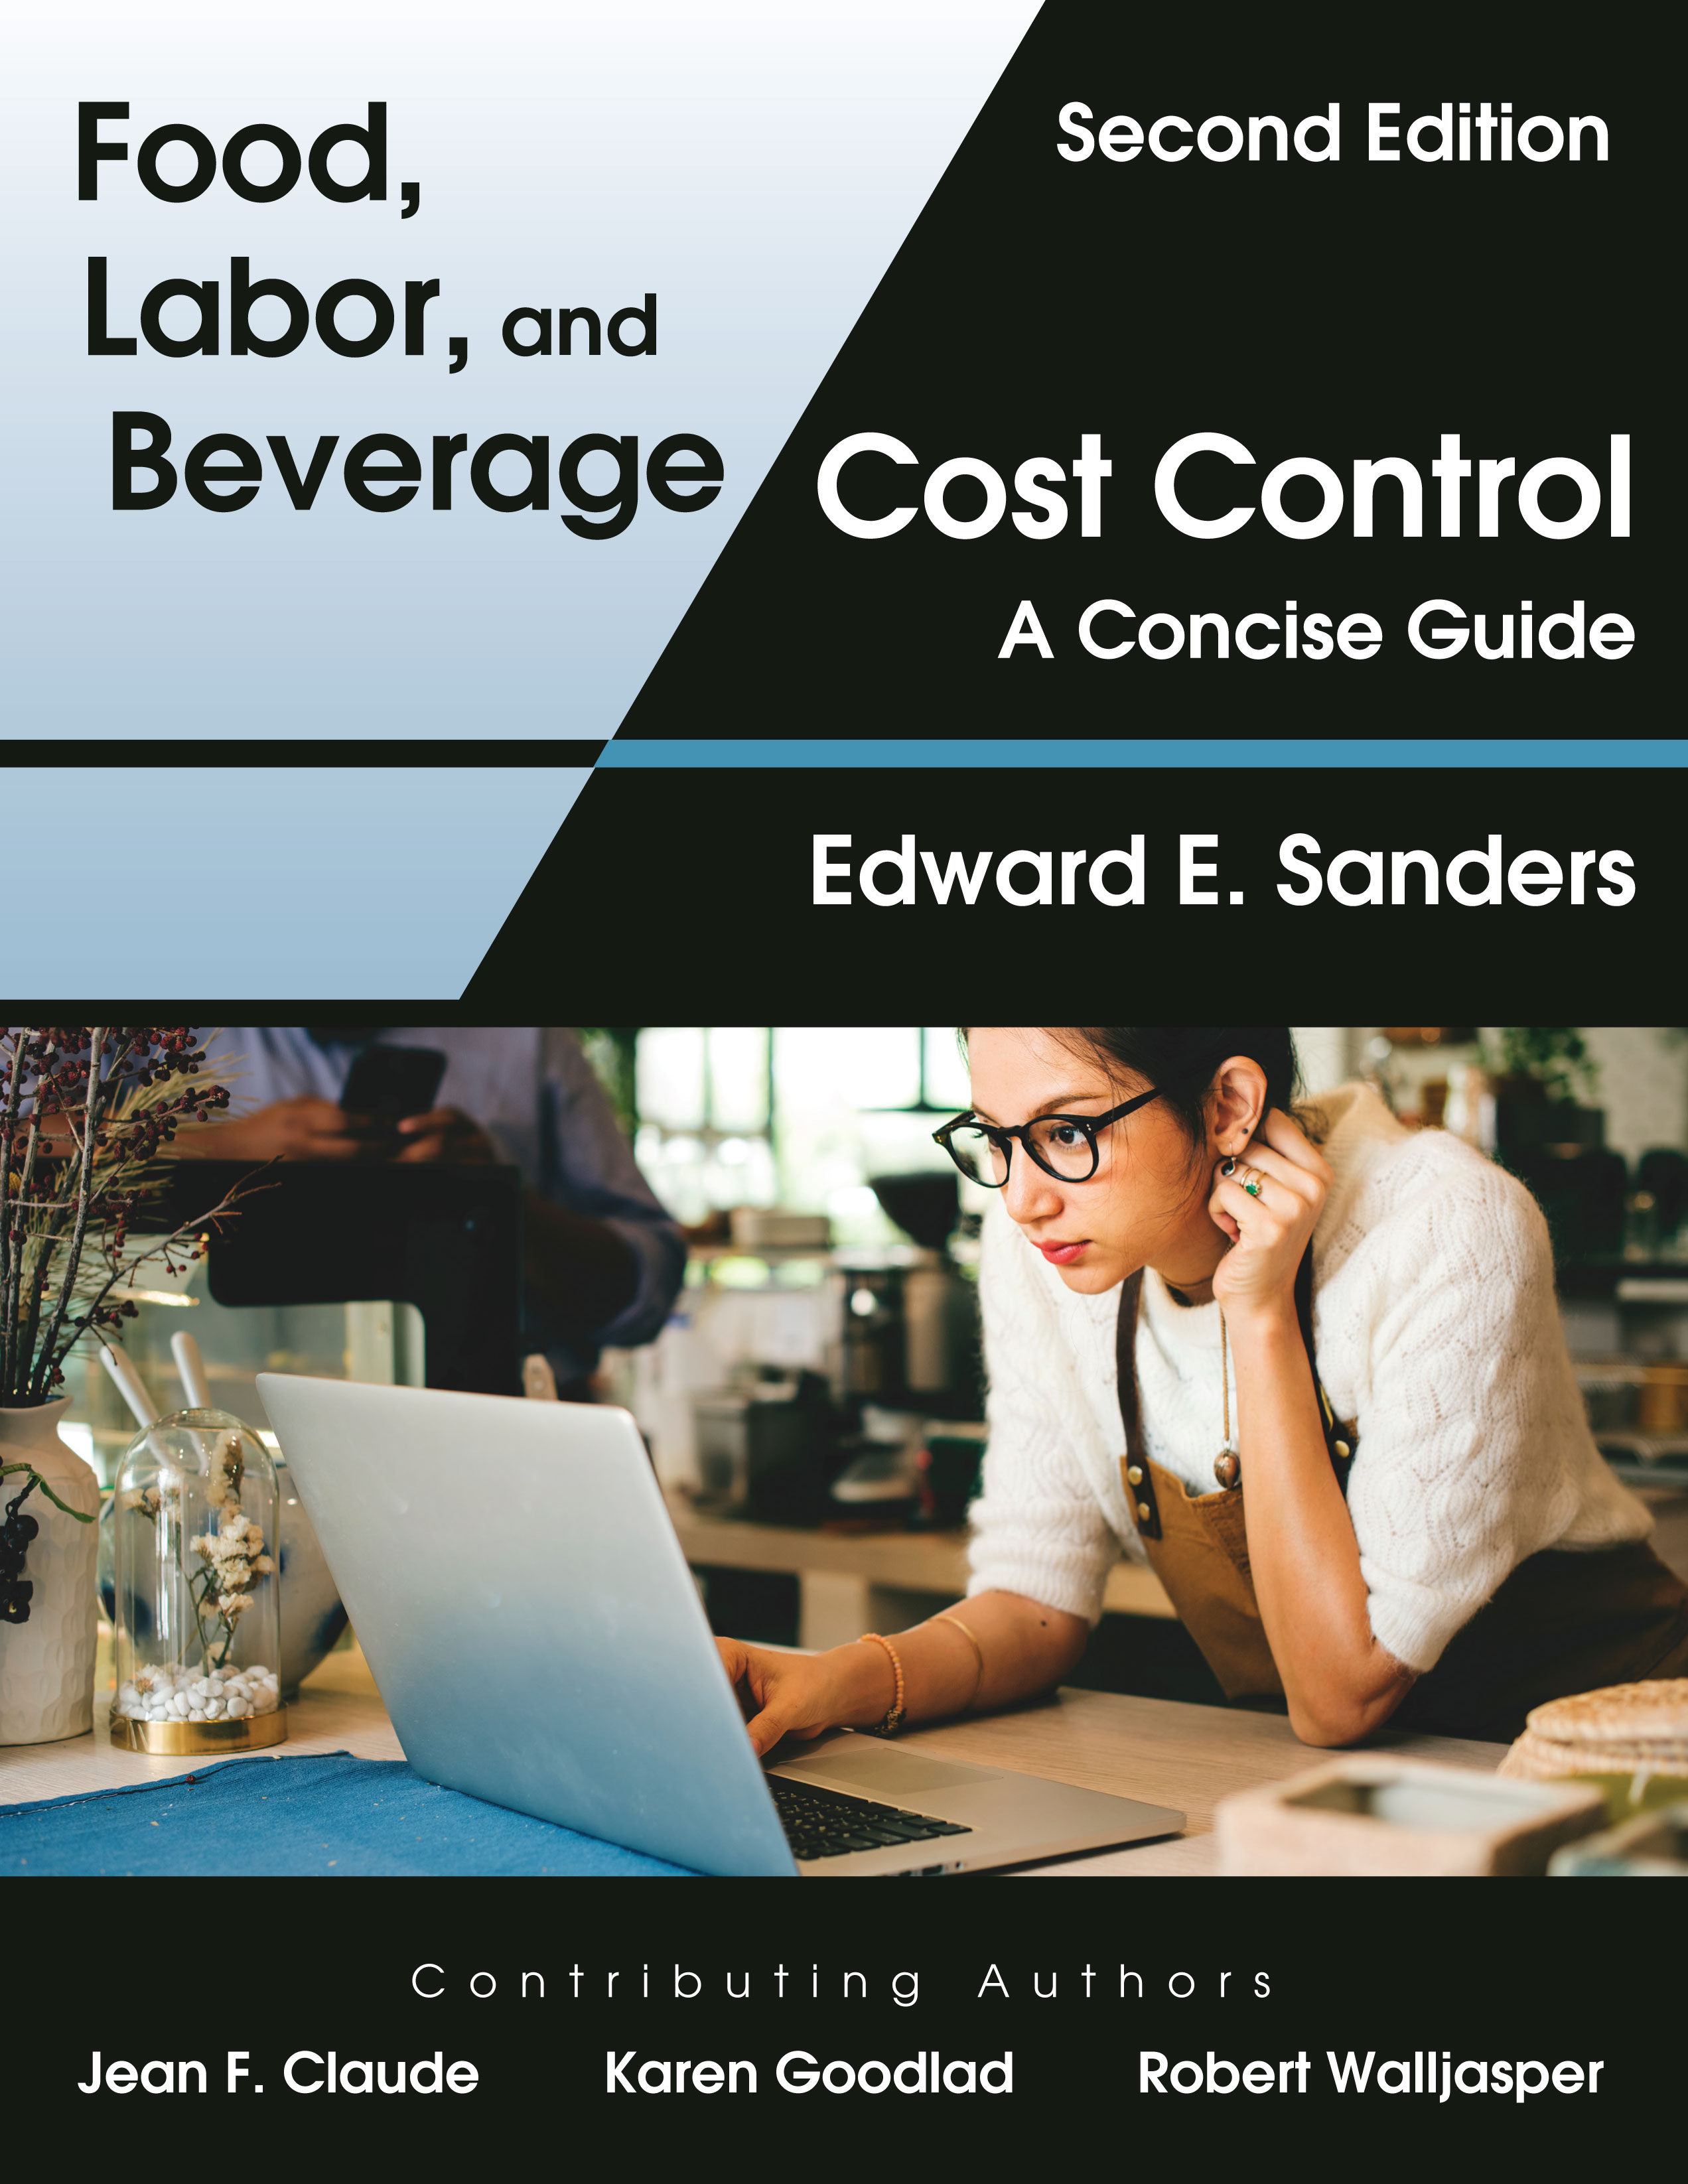 Food, Labor, and Beverage Cost Control: A Concise Guide by Edward E. Sanders